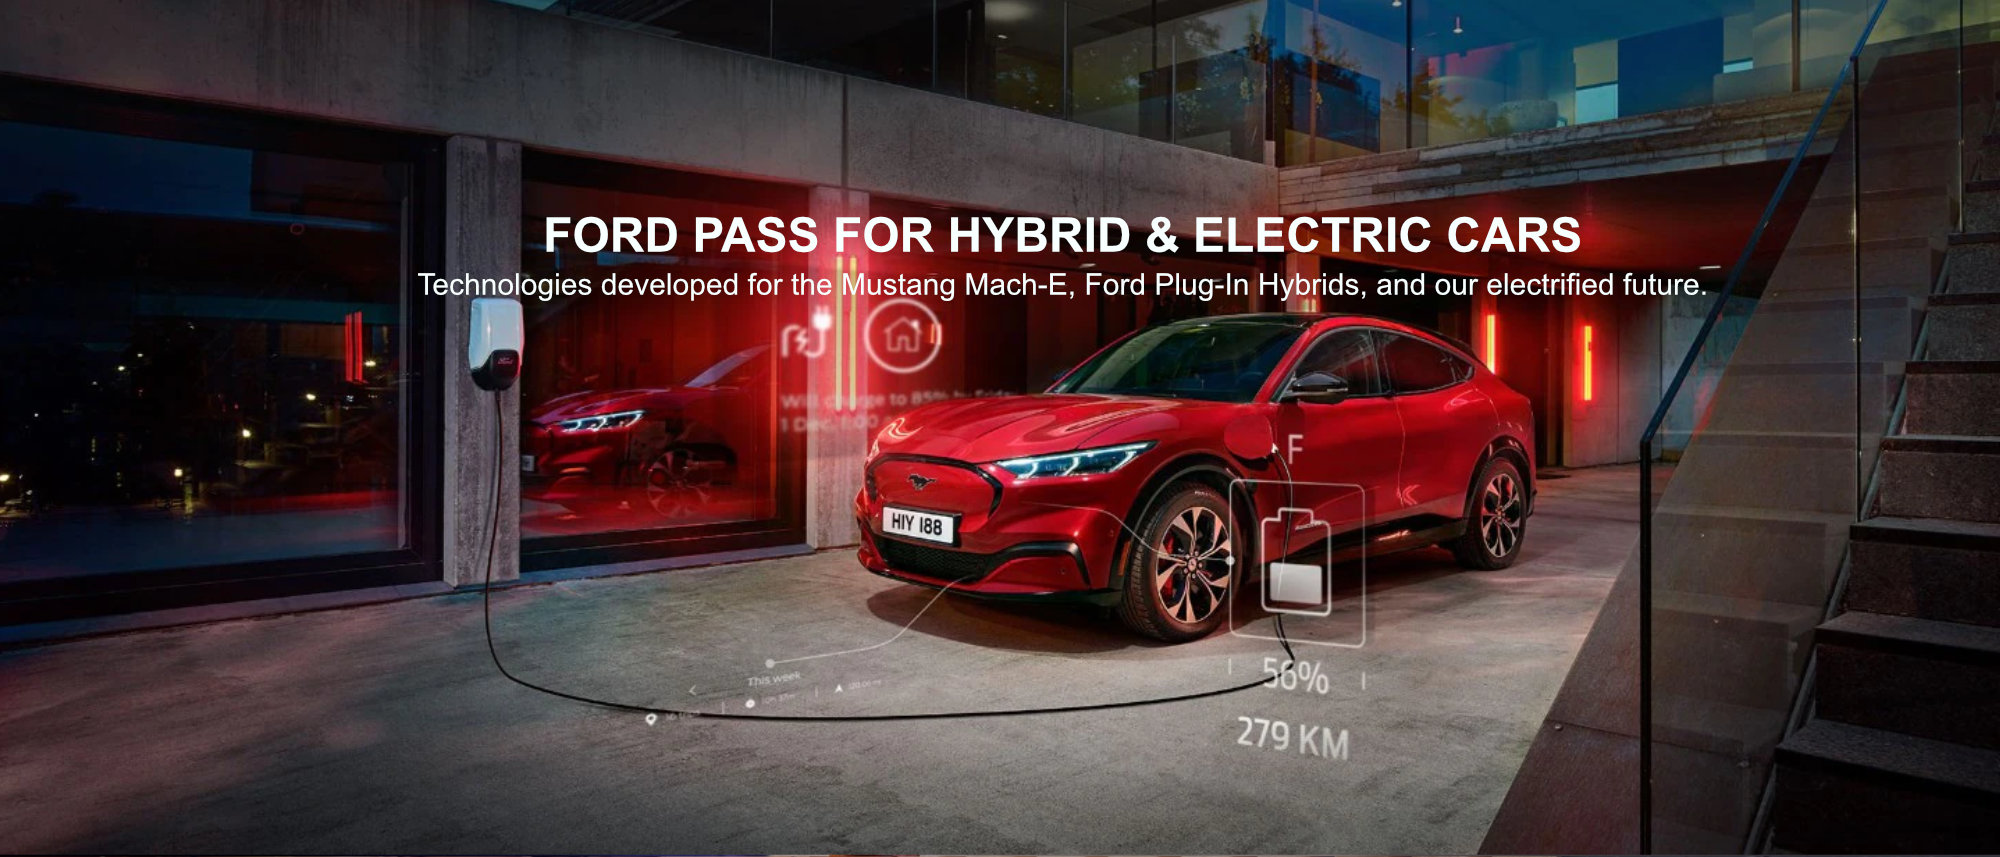 FordPass hybrid and electric cars